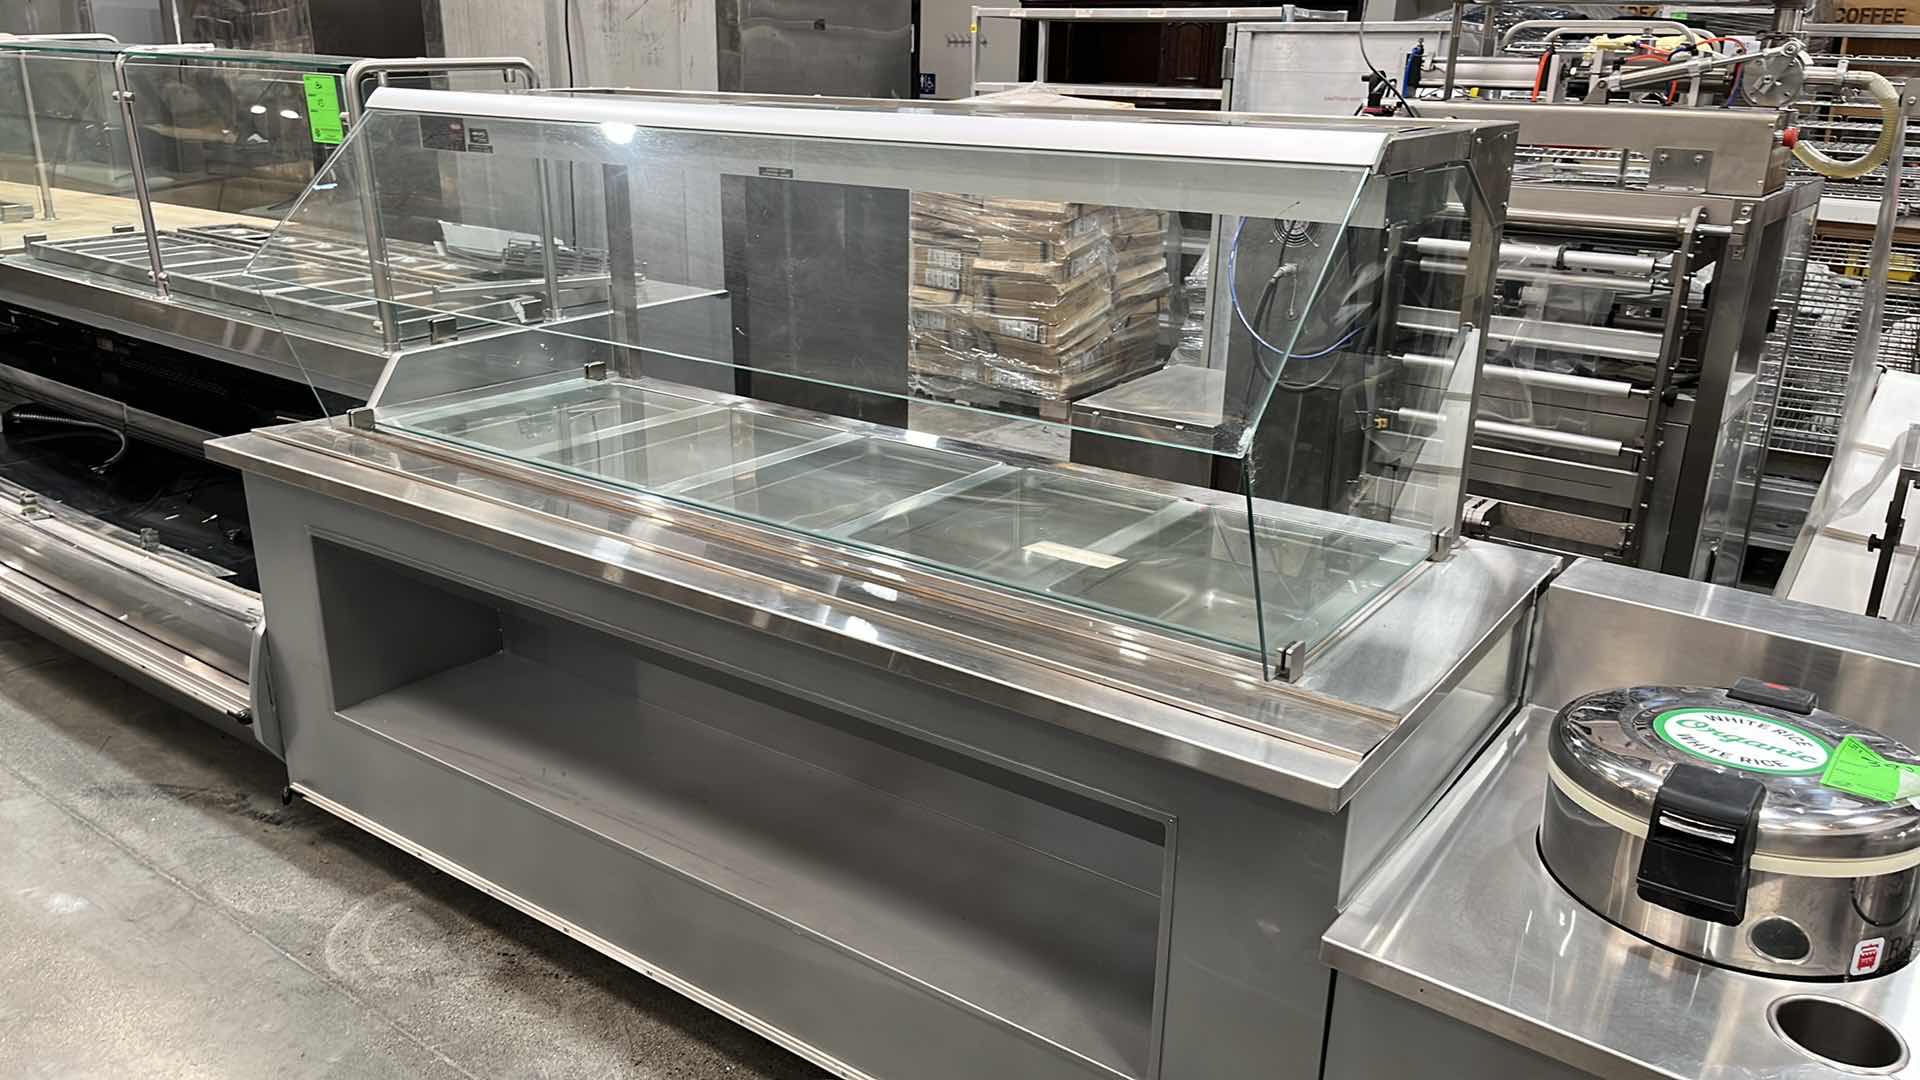 Photo 1 of HUSSMANN COMMERCIAL SELF-SERVICE FOOD COUNTER W HOT WELLS (MODEL IM-05-I7-FH)